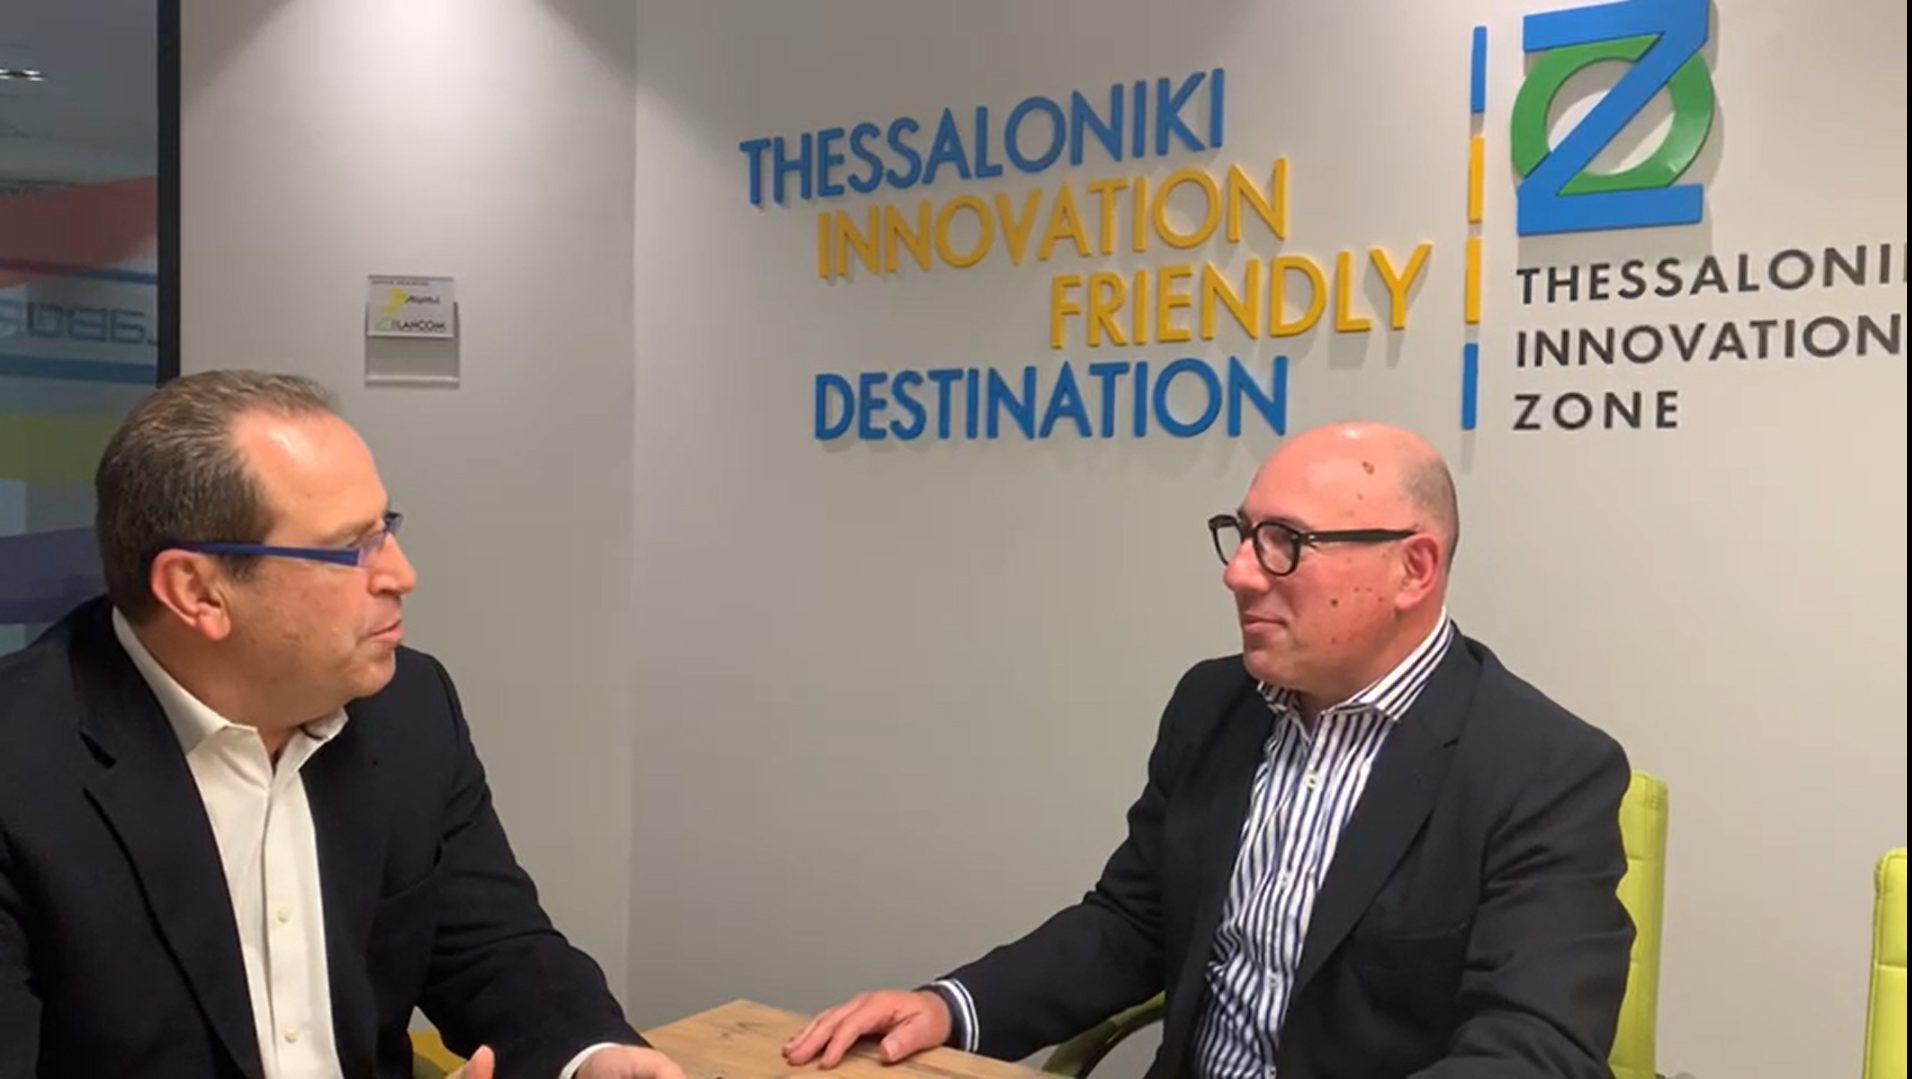 Watch the #2 part of Nick Gonios’ interview at Thessaloniki Innovation Zone!